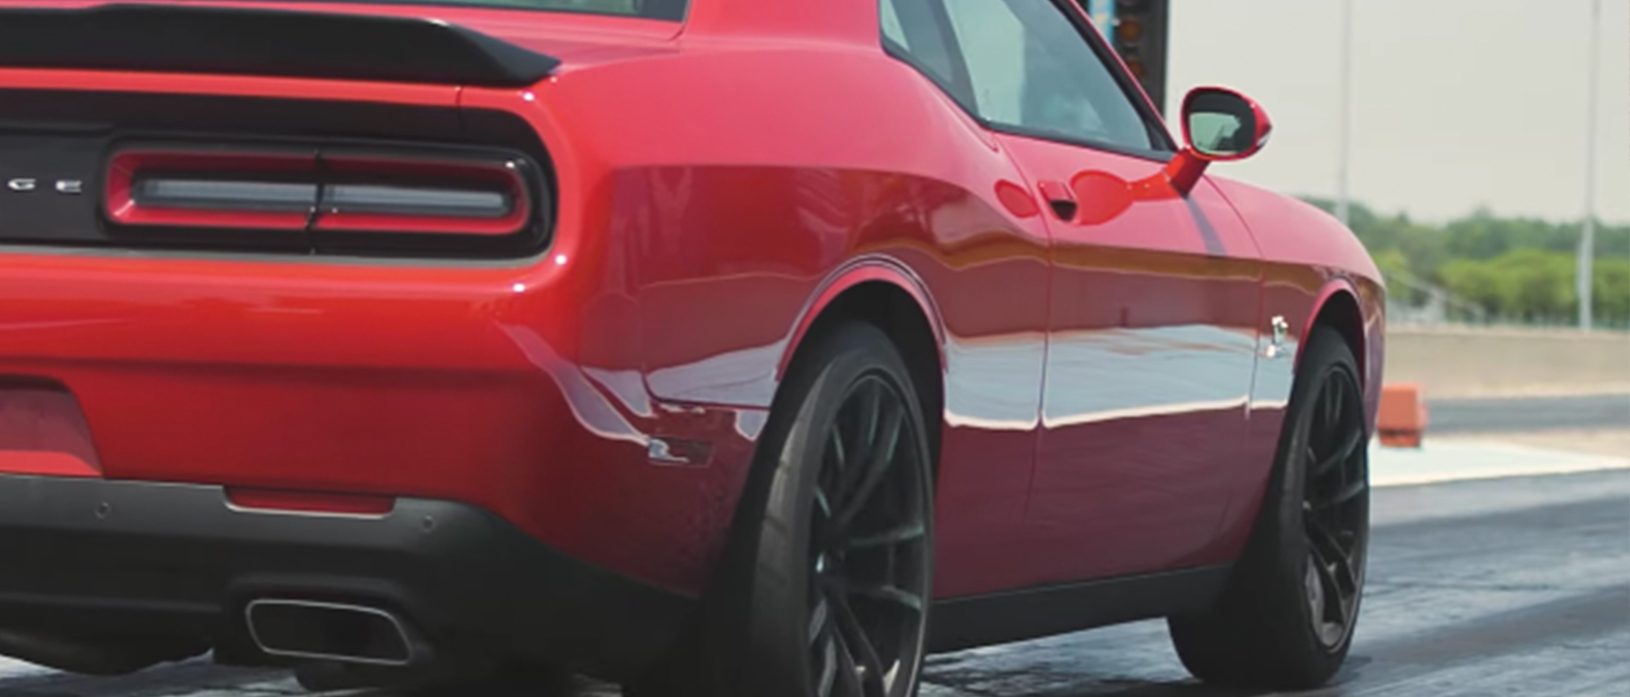 Can the Dodge Challenger R/T Scat Pack 1320 Beat A Ford Mustang?